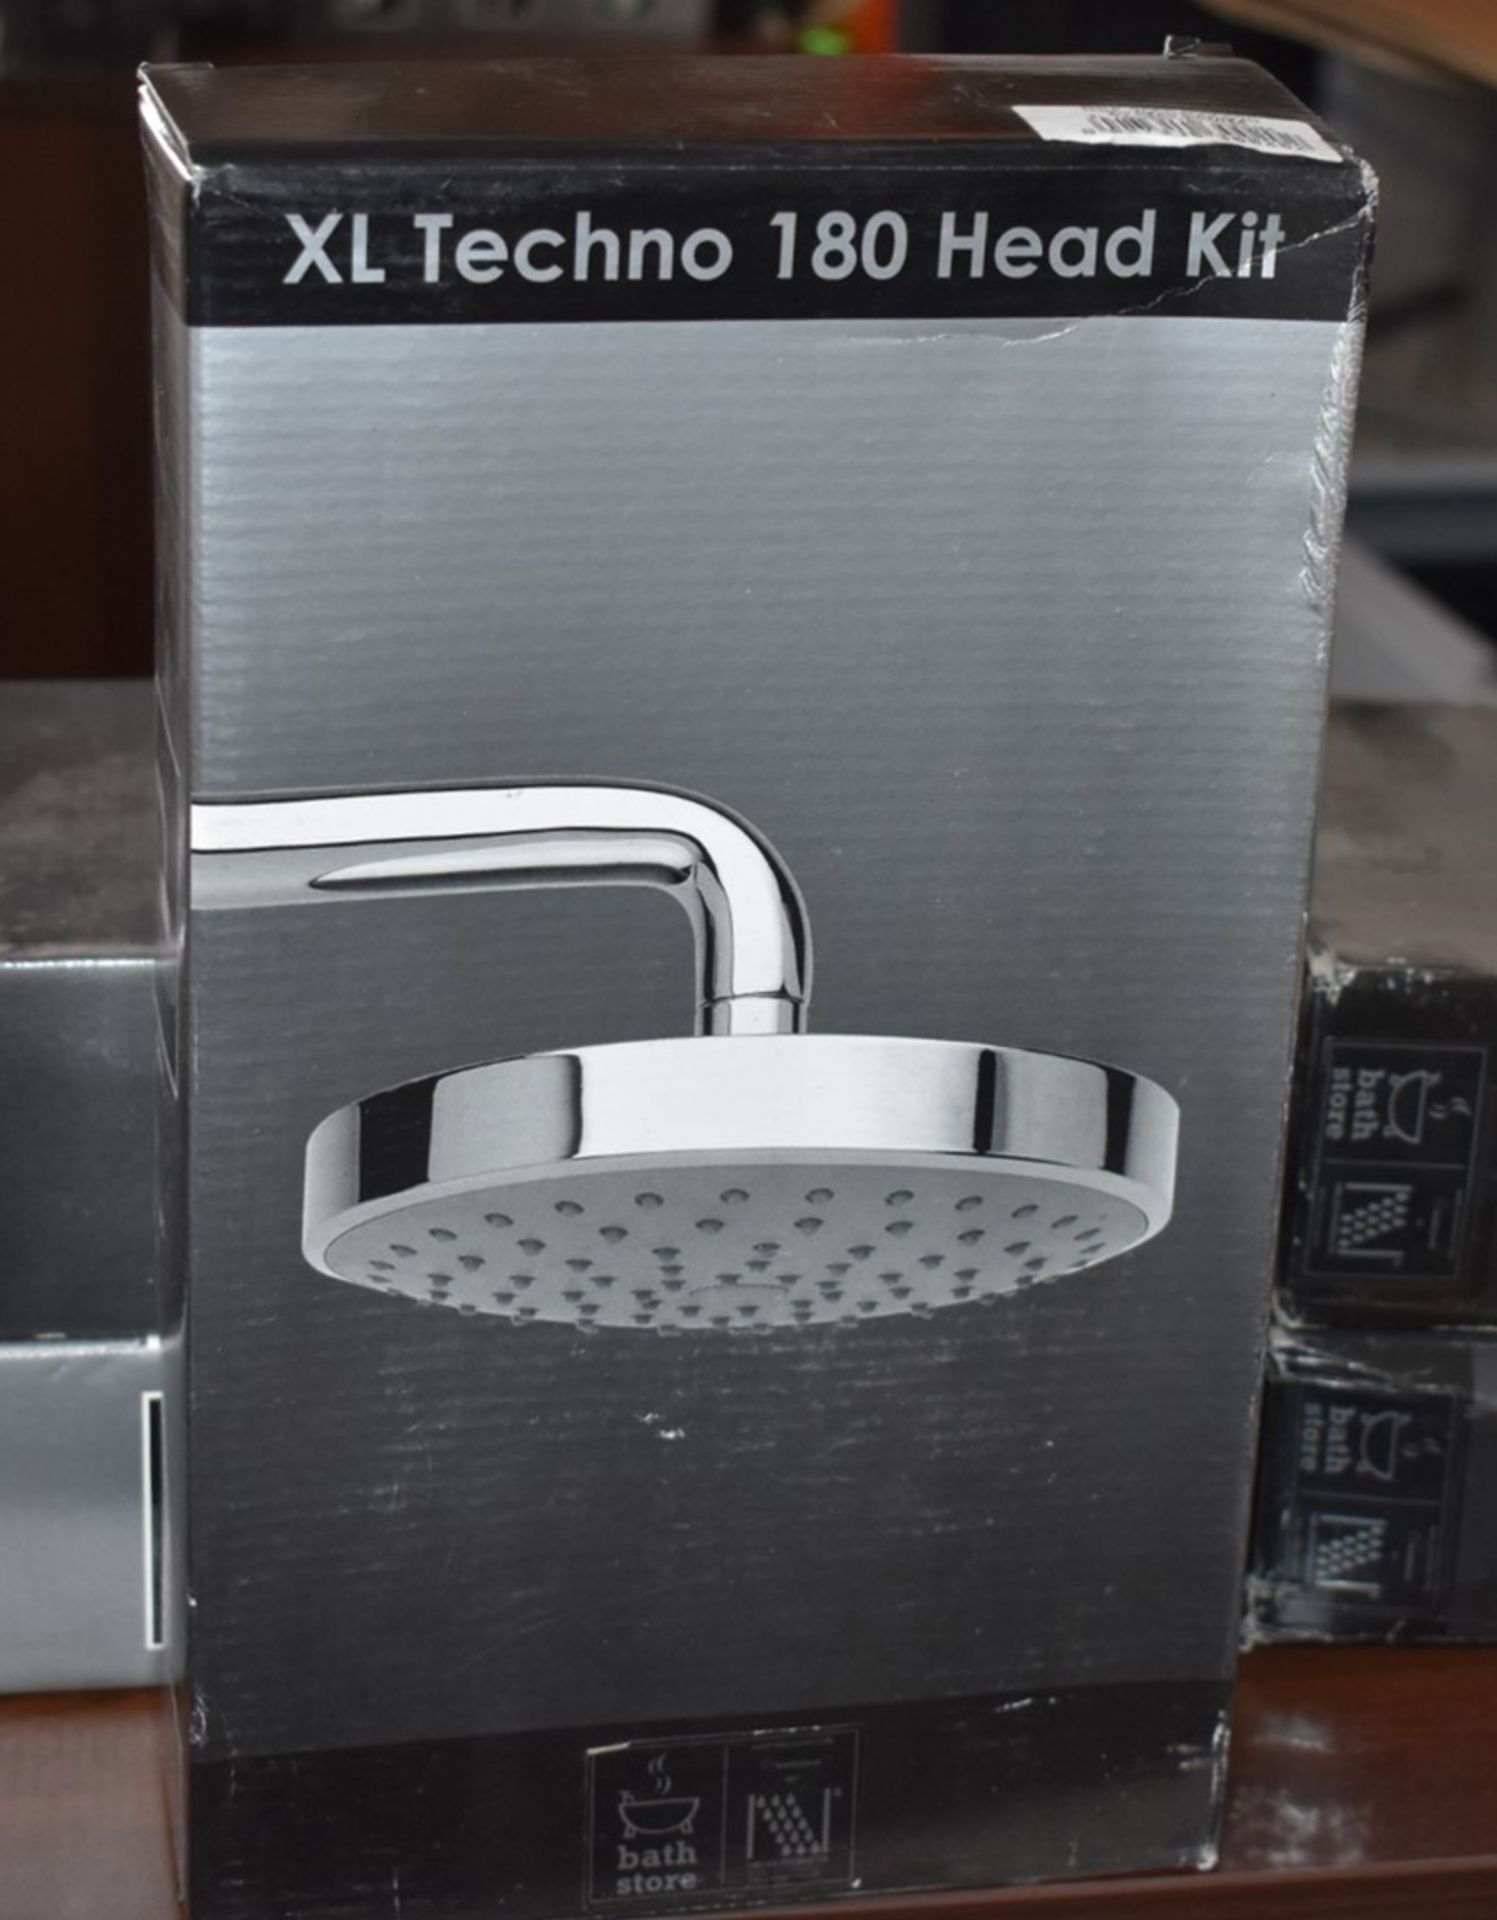 1 x Bathstore XL Techno 180 Shower Head Kit - Brass With Chrome FInish - New and Boxed - CL011 -